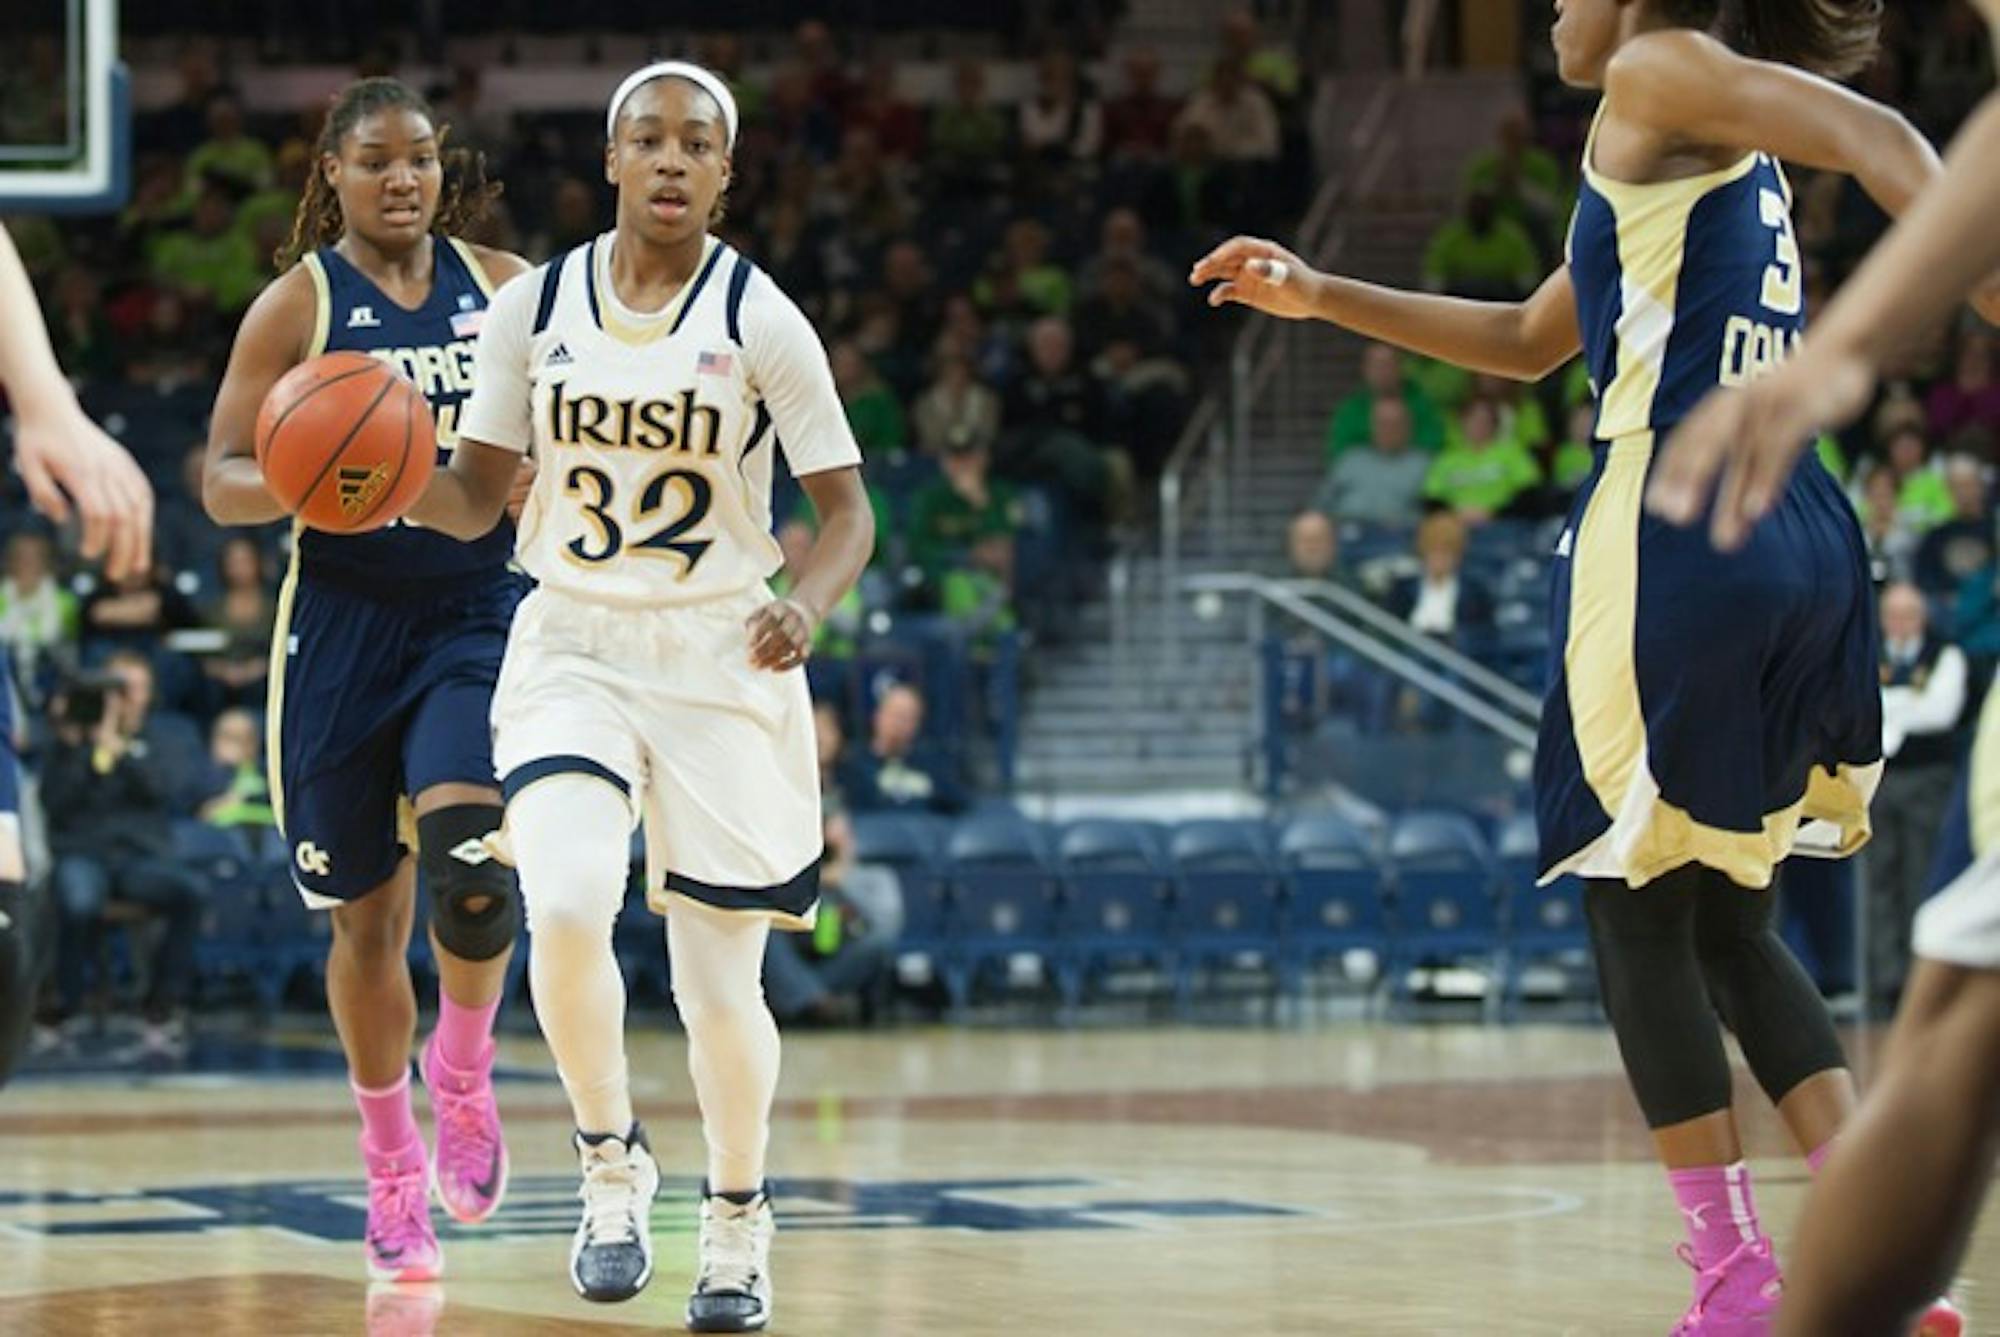 Irish sophomore Jewell Loyd pushes the ball during Notre Dame’s 87-72 win over Georgia Tech on Monday. Loyd finished with 27 points, nine rebounds and two assists.